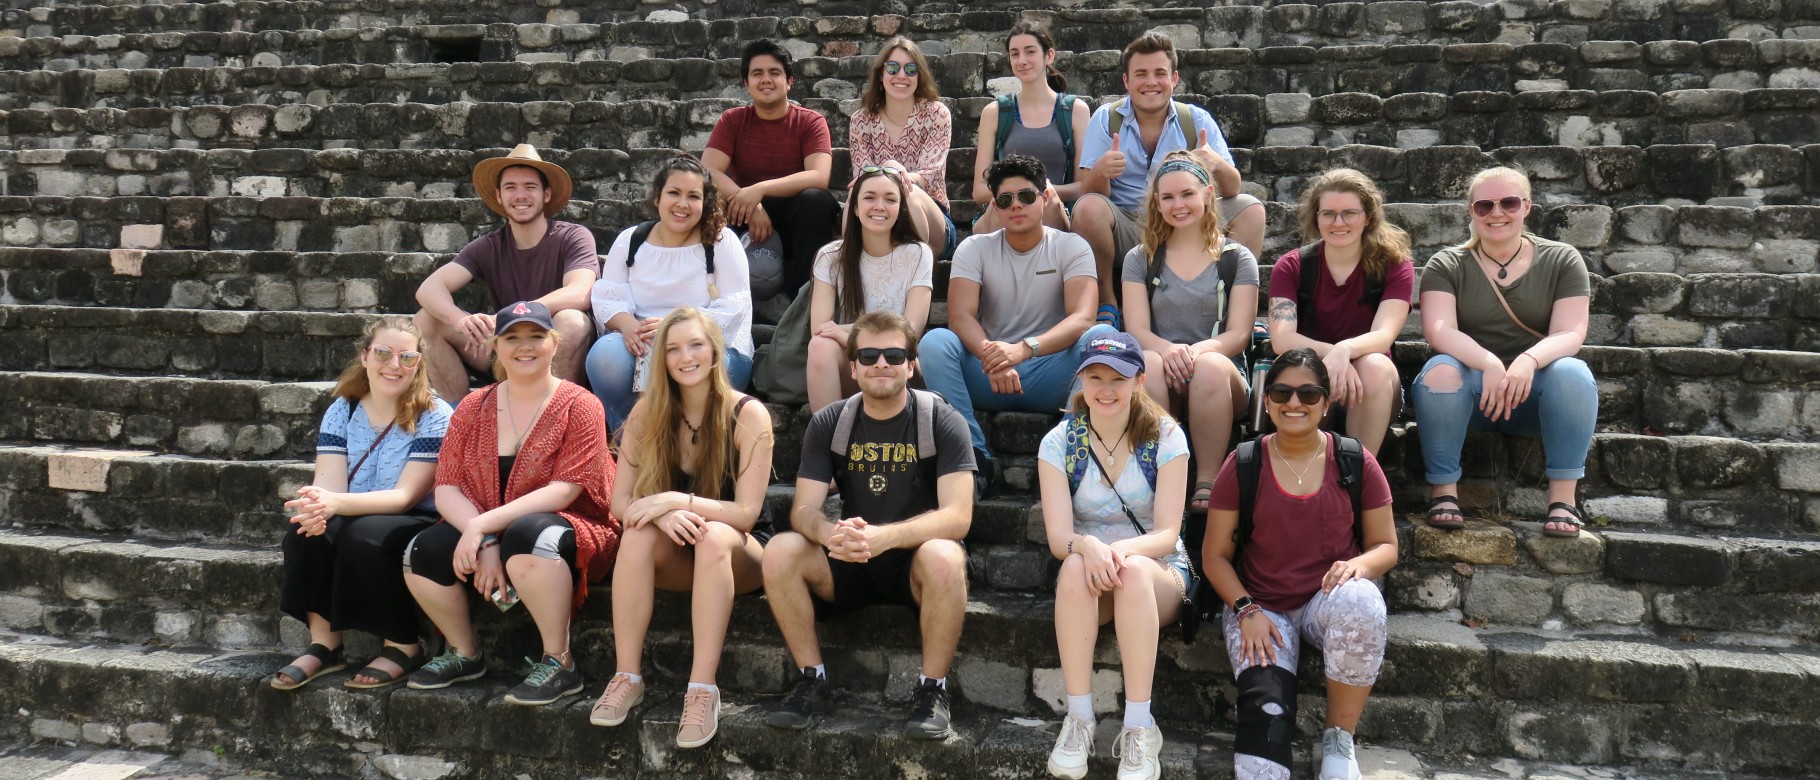 Students from a Global Citizenship class spent their spring break helping others in Mexico